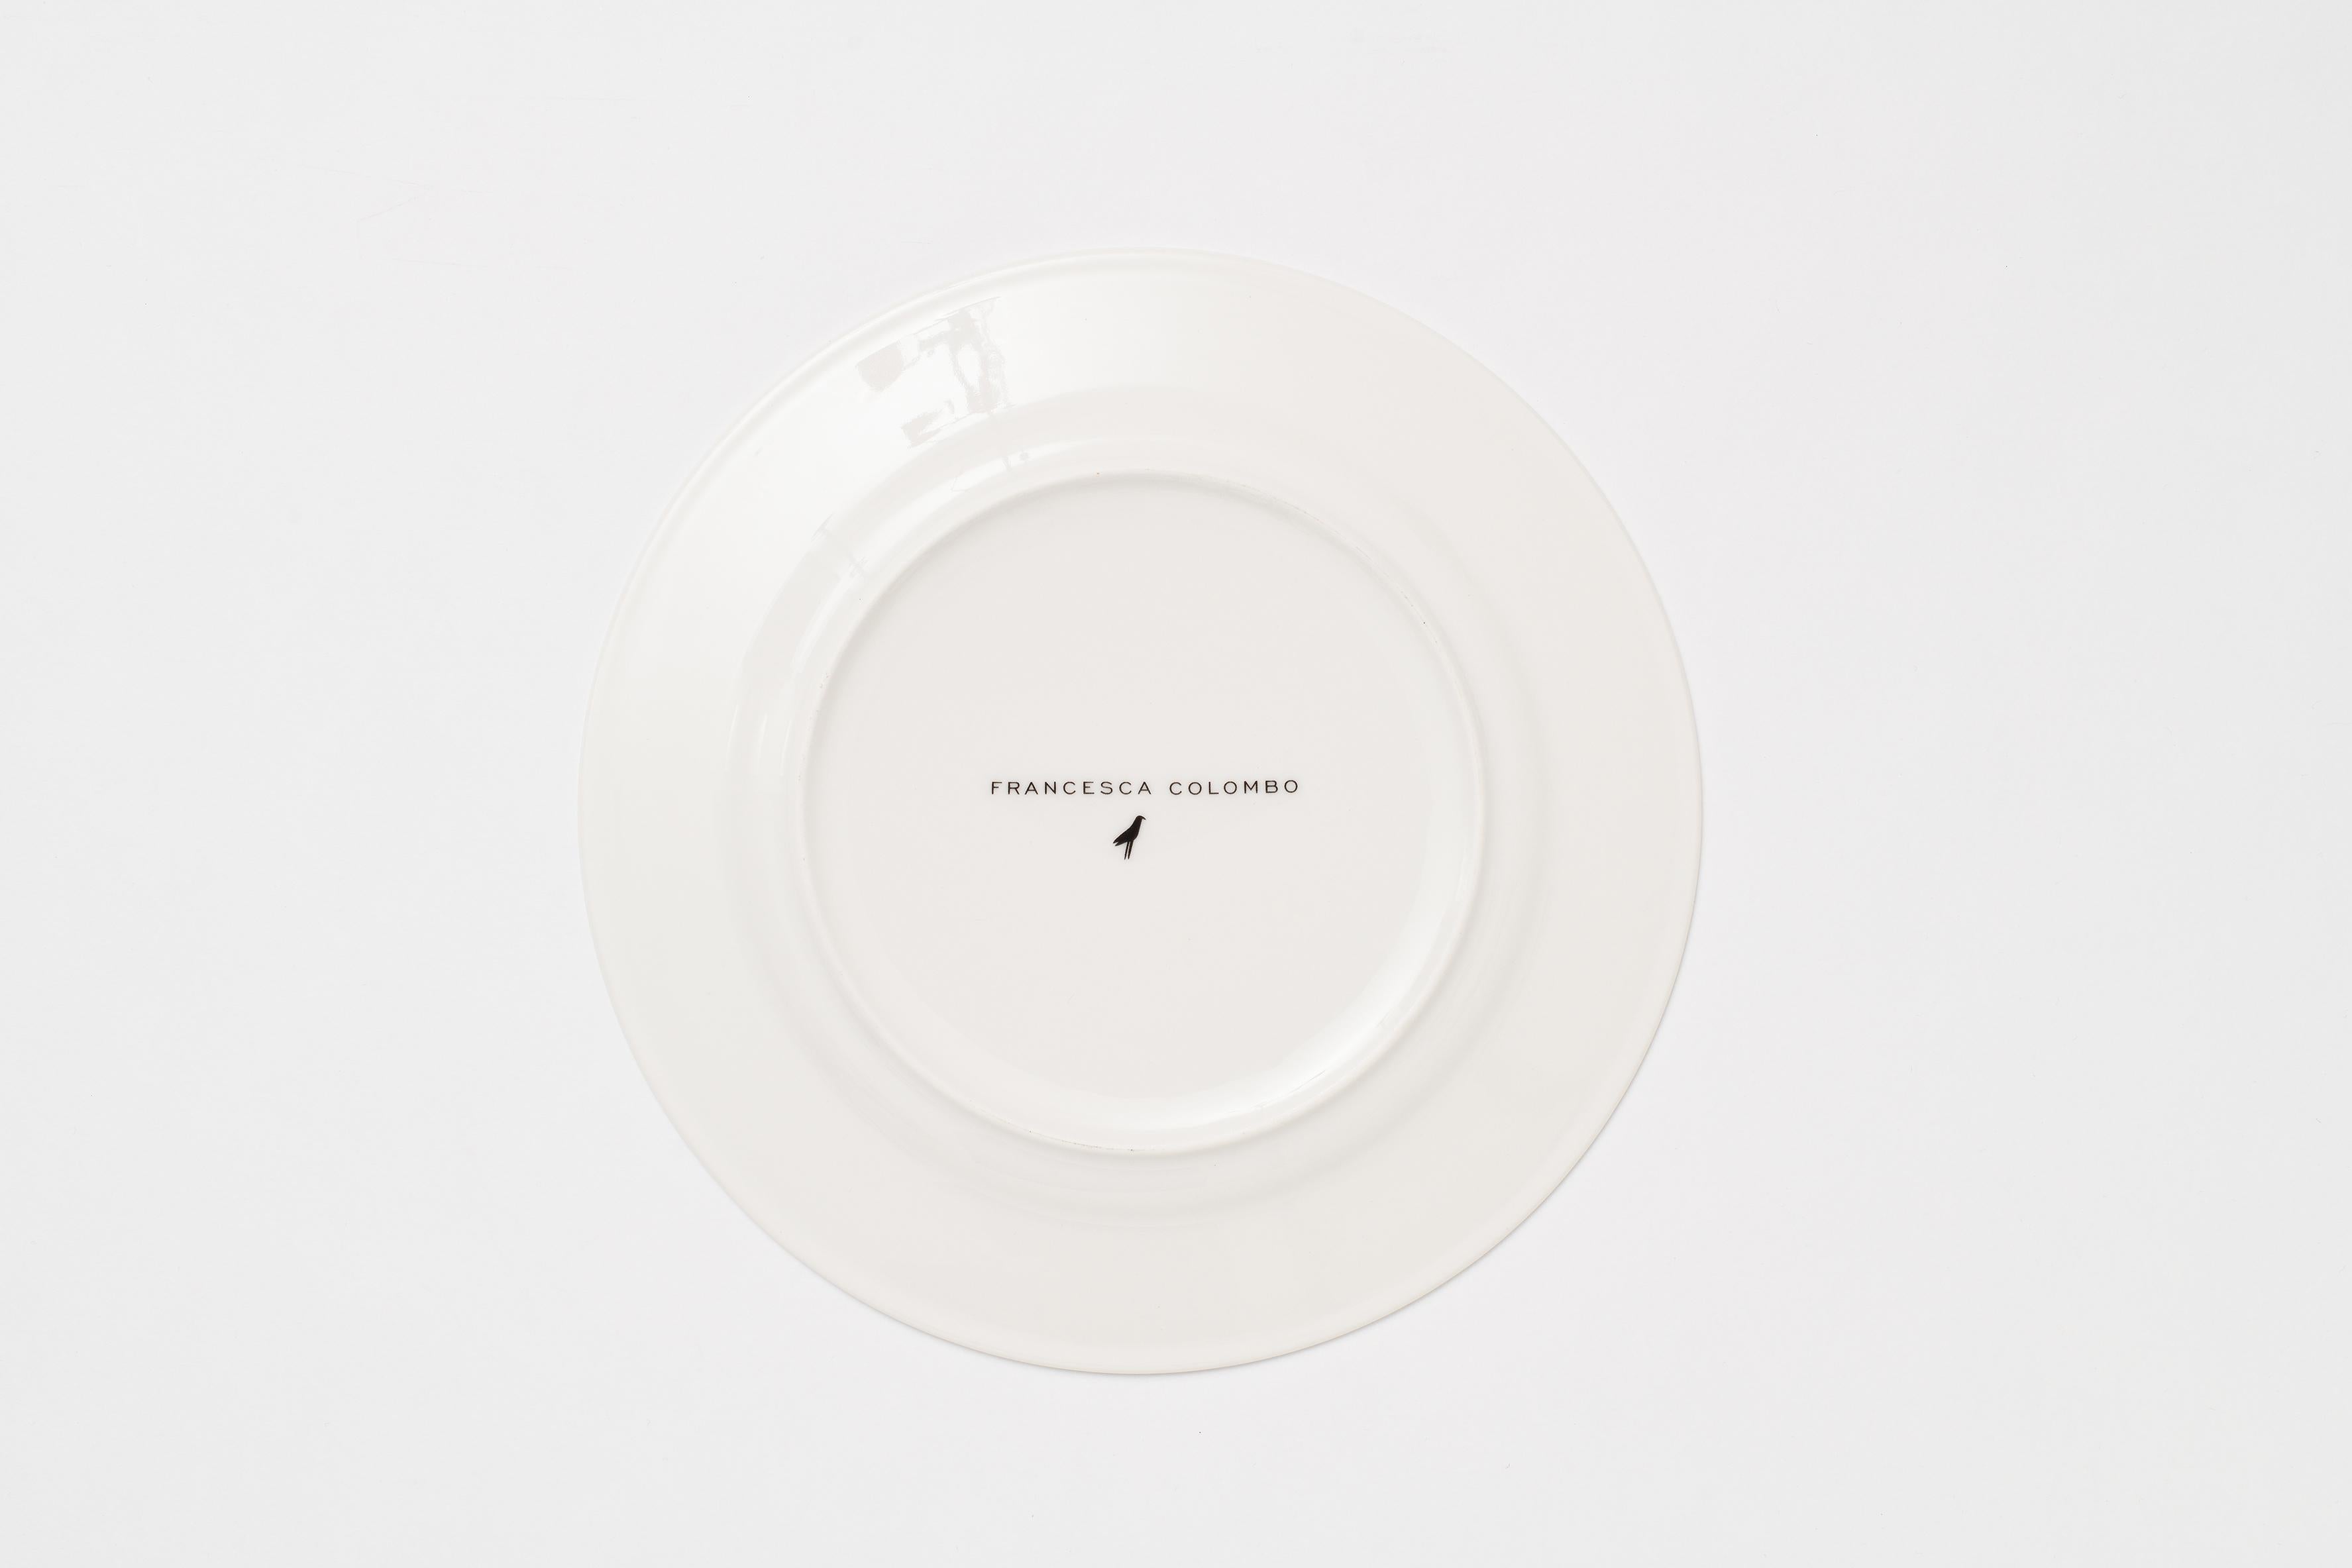 A Caribou, a typical animal of the woods is gently painted on this dinner plate with soft black tones and it is surrounded by a delicate and intriguing mix of wild flowers and leaves reinterpreted in a fresh and poetic color way. These porcelain